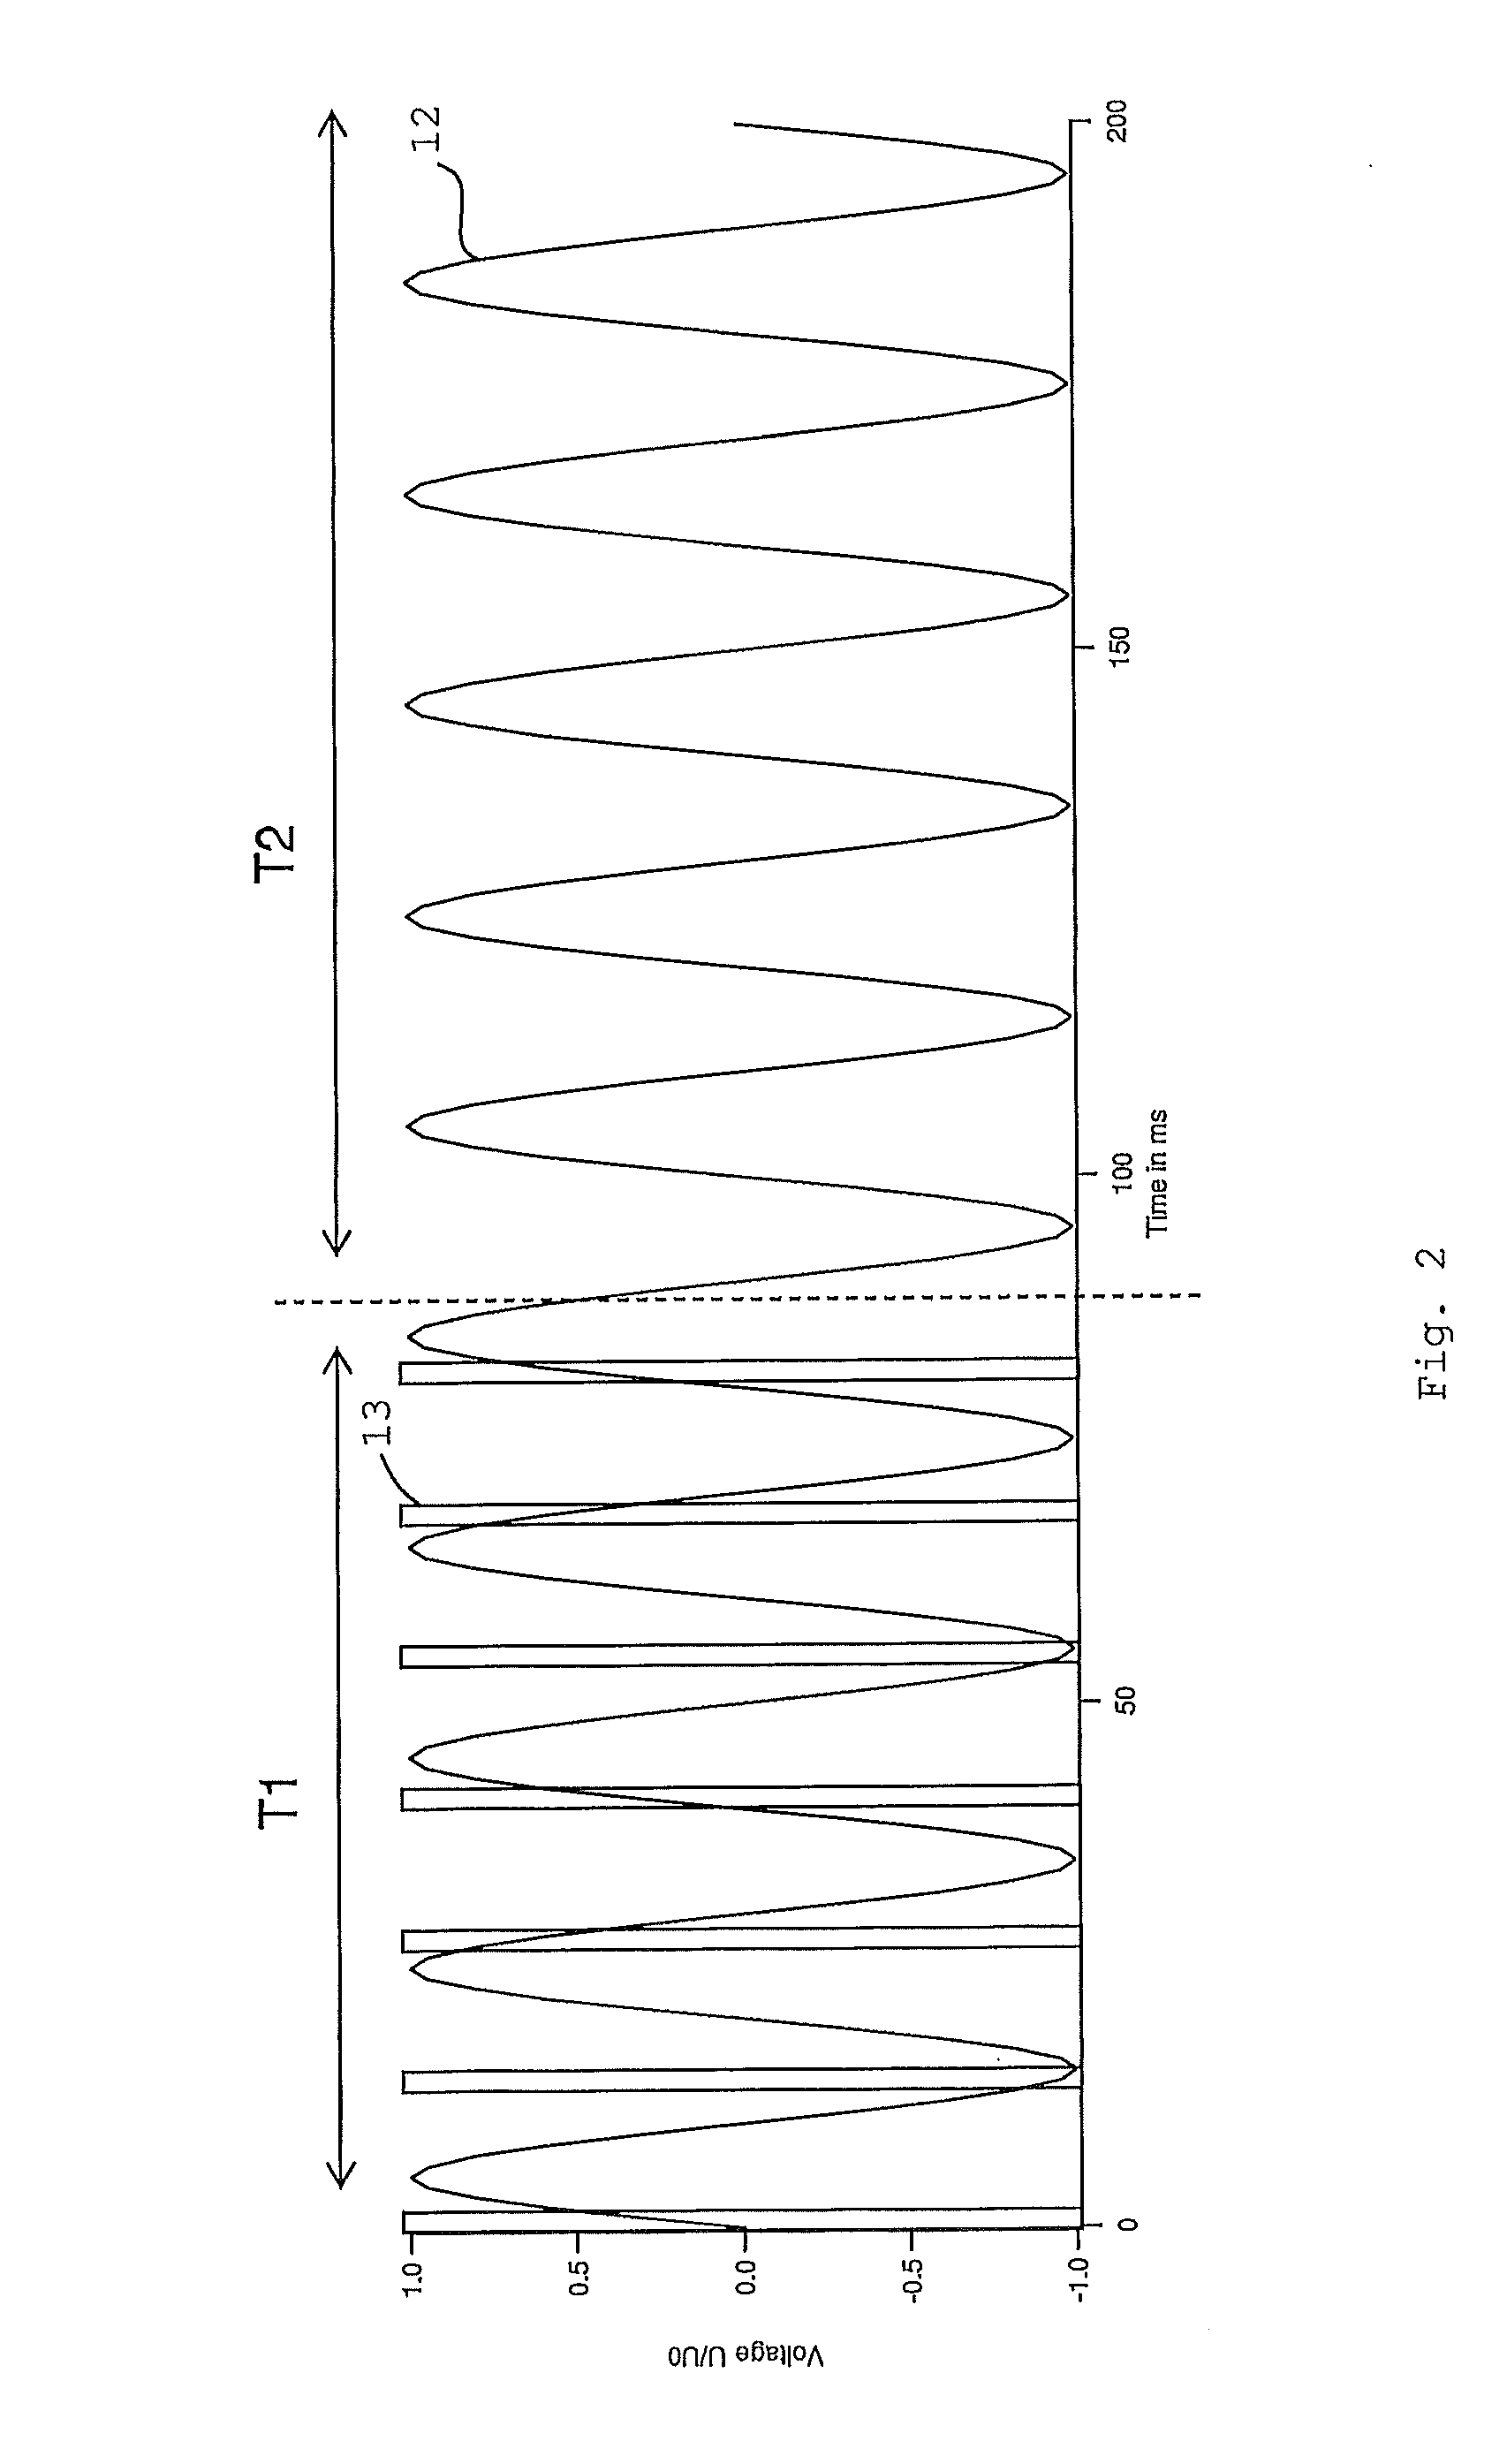 Method and system for partial discharge testing of an insulation component